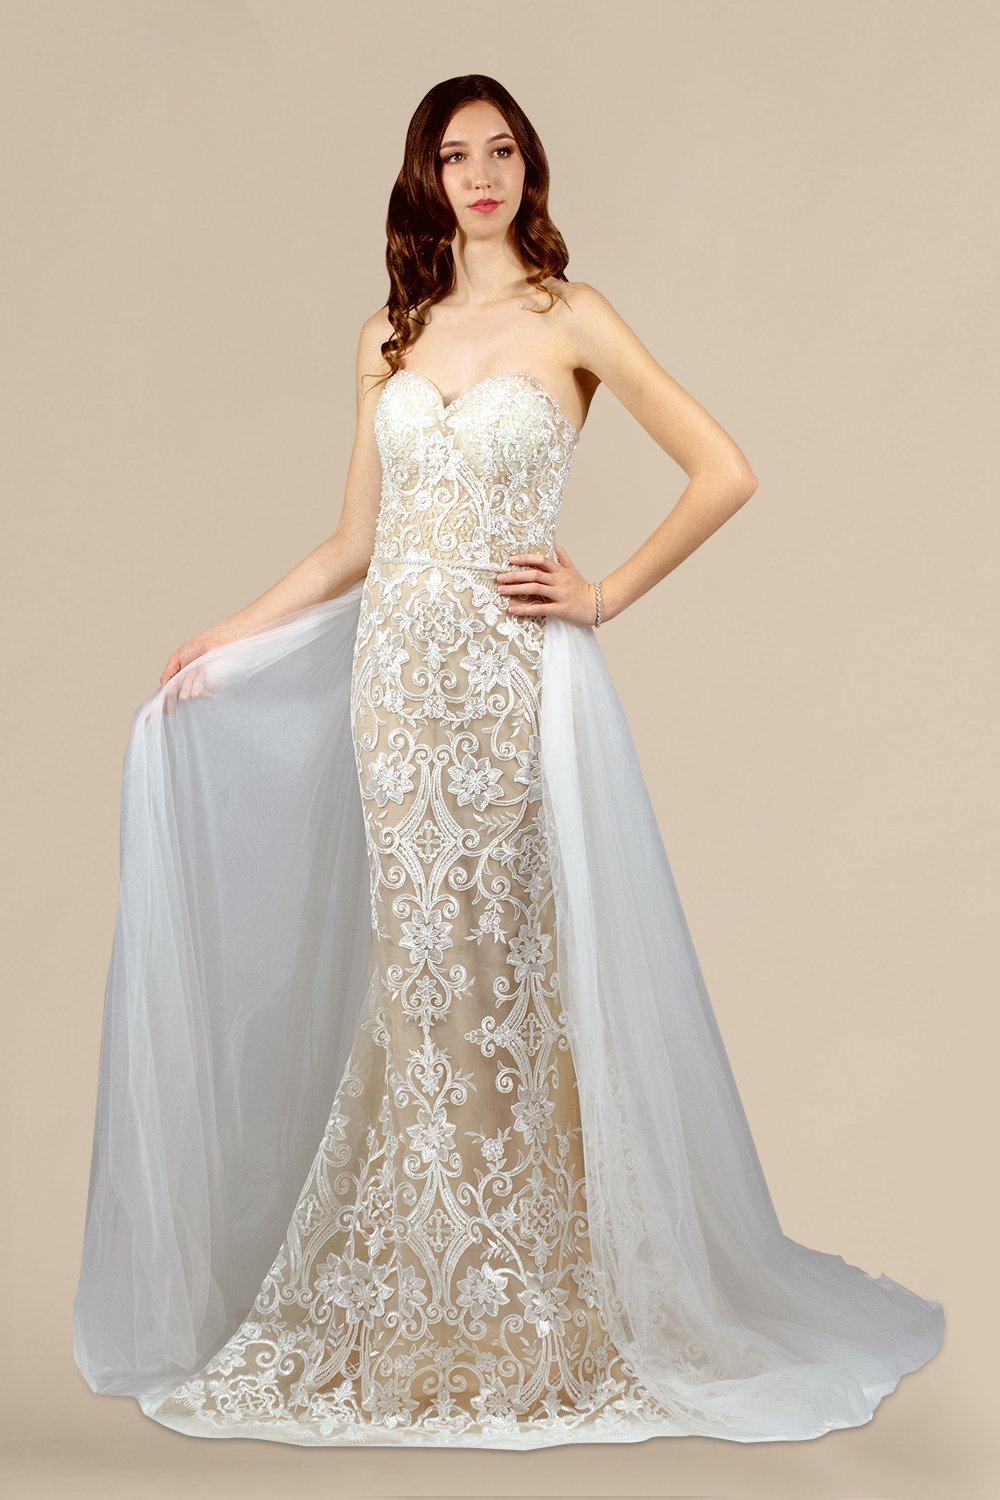 KRISTALINA  Ivory/Nude Lace Wedding Gown With Detachable Skirt